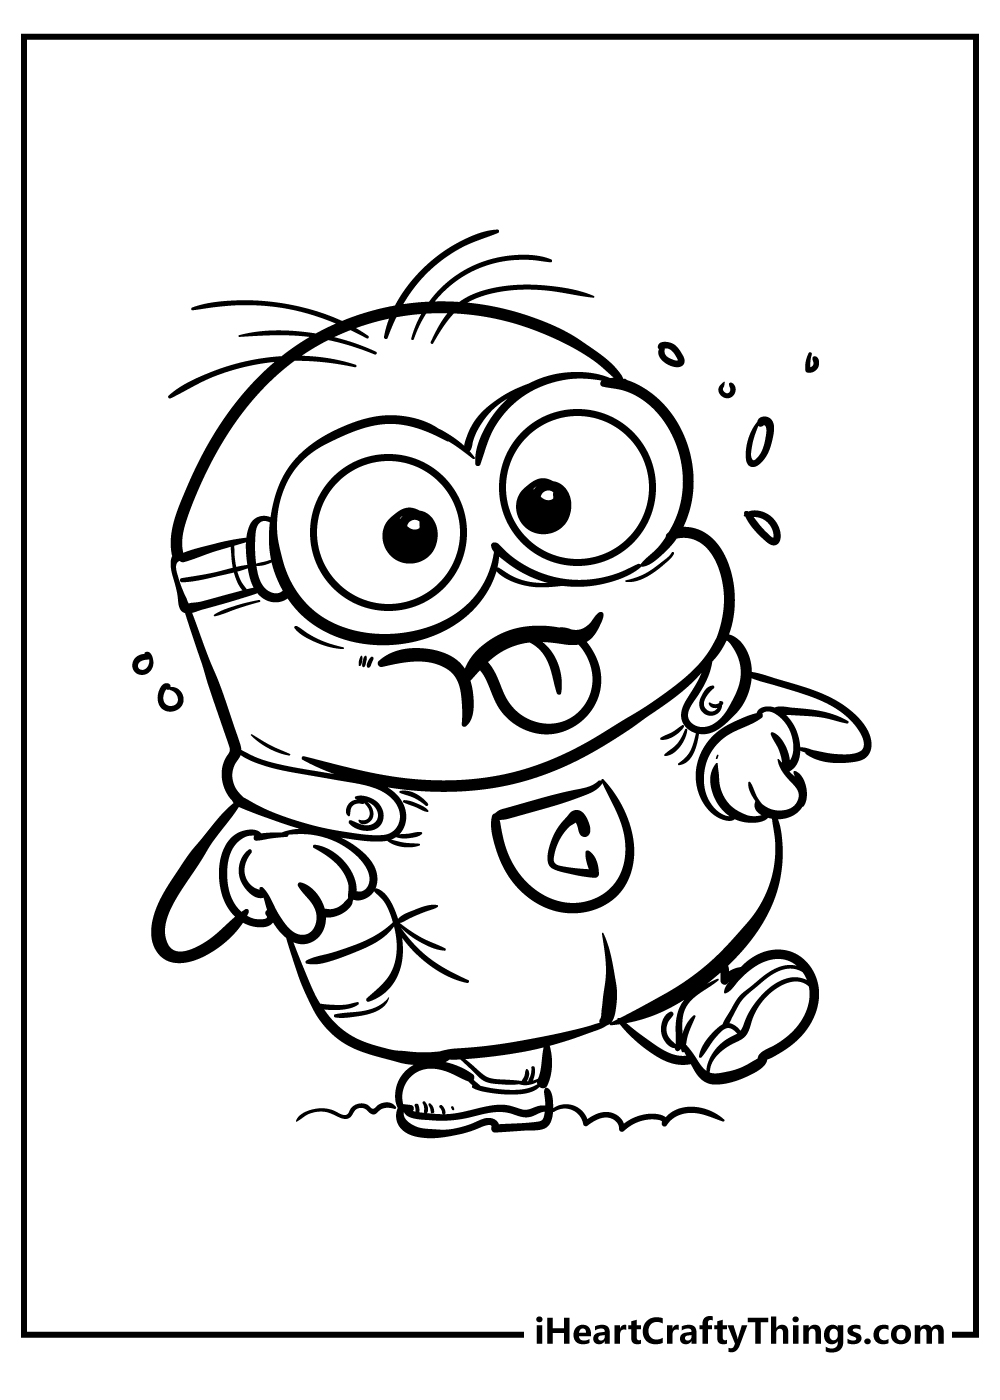 Minions coloring pages free printables